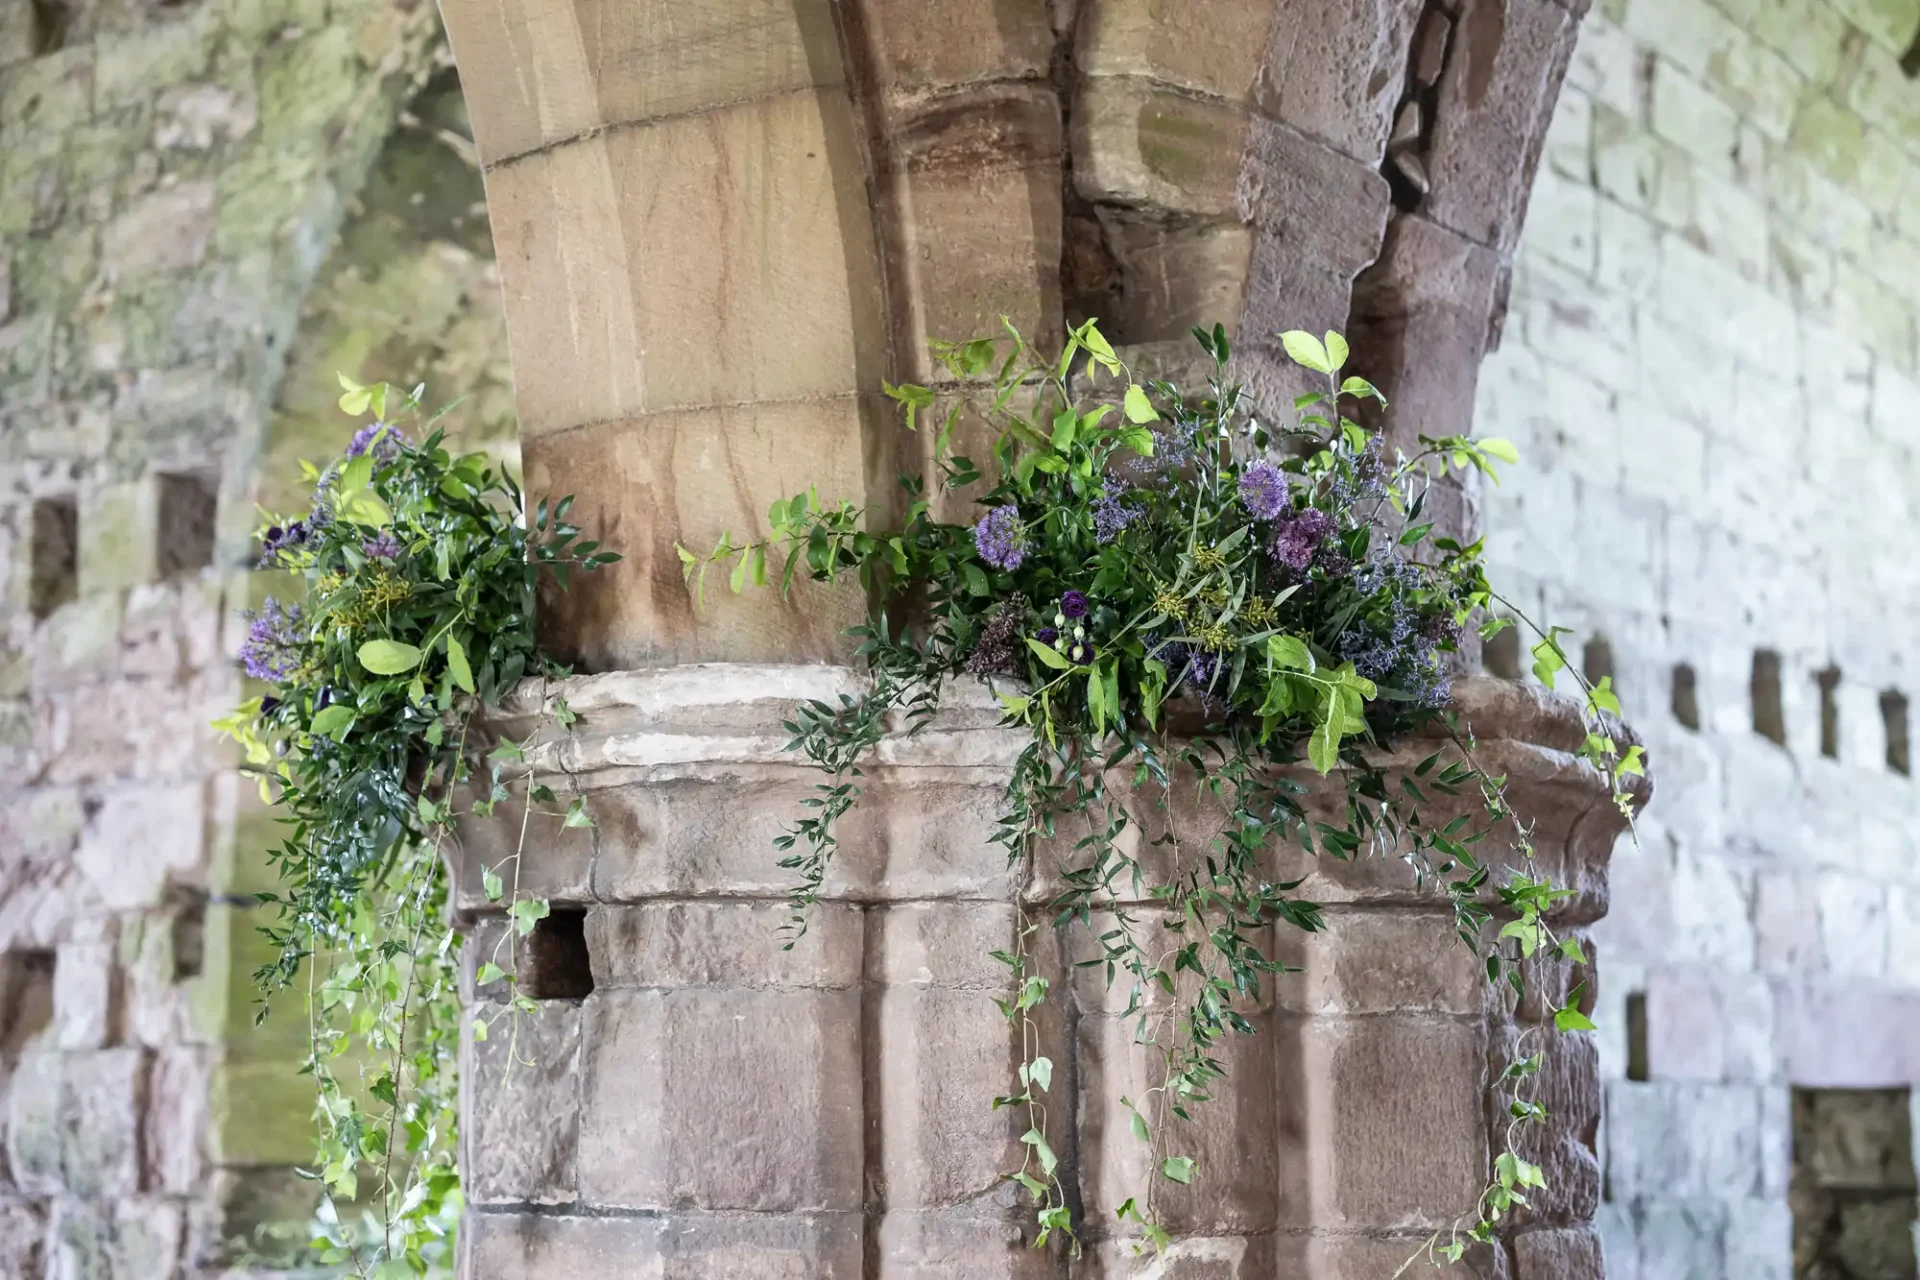 Stone column decorated with green vines and purple flowers, situated in an old, rustic building with stone walls.